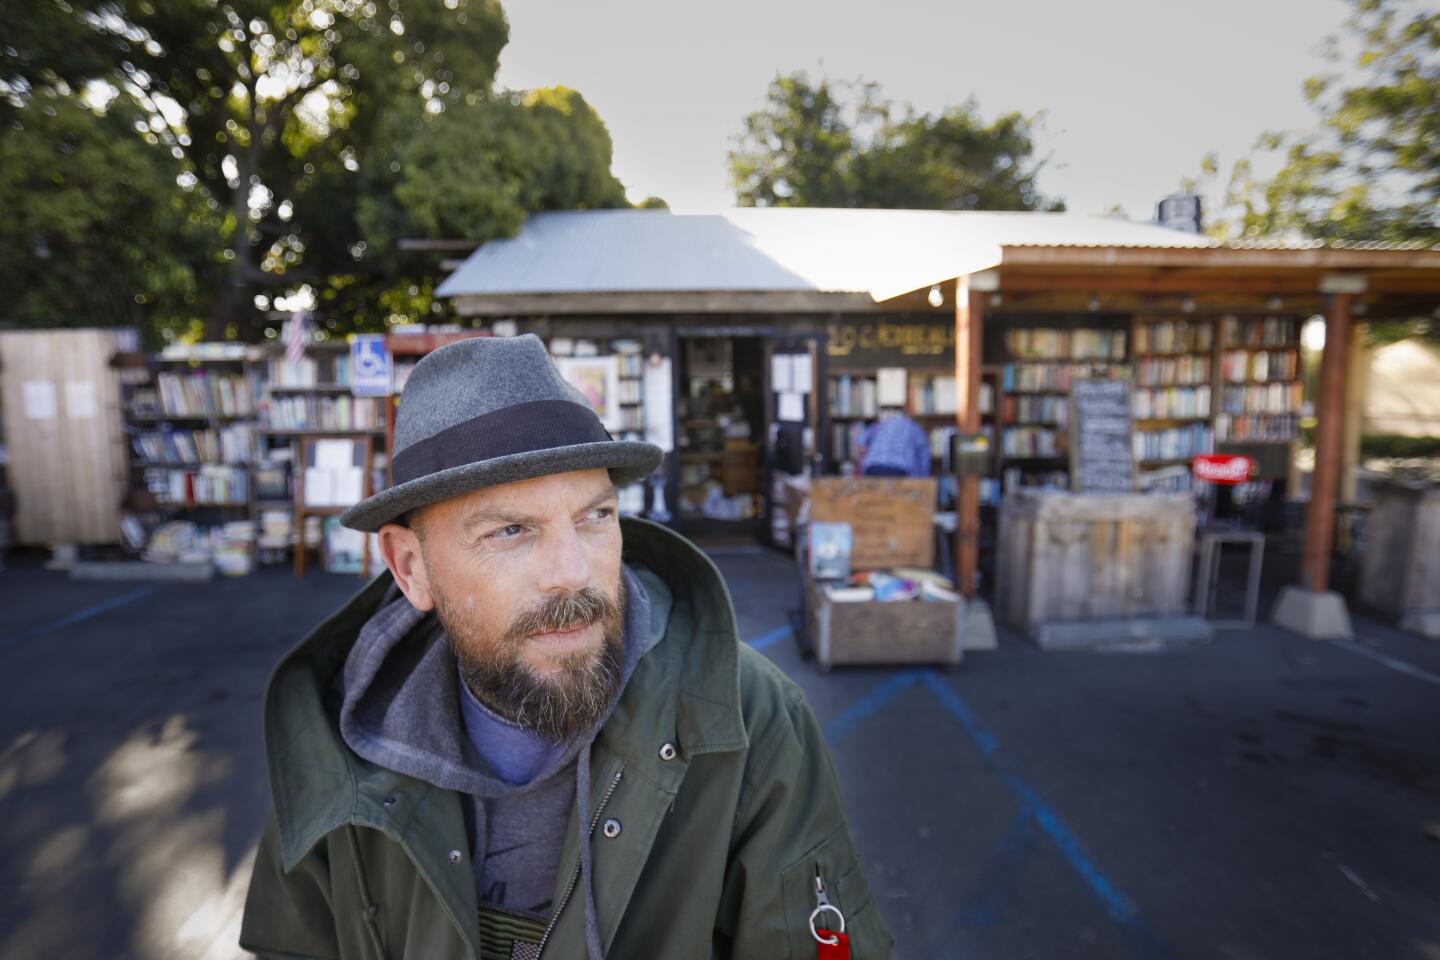 Sean Christopher, the owner of Lhooq Books, a funky vintage bookstore in Carlsbad Village sits in front of the store that is endanger of going away. Recently he received a 60-day eviction notice for both the shop and the adjoining house where he has raised his son, alone. He's hoping to achieve a stay of eviction on the property long enough to sell off his book inventory and find a new space without going bankrupt and ending up homeless with his son.